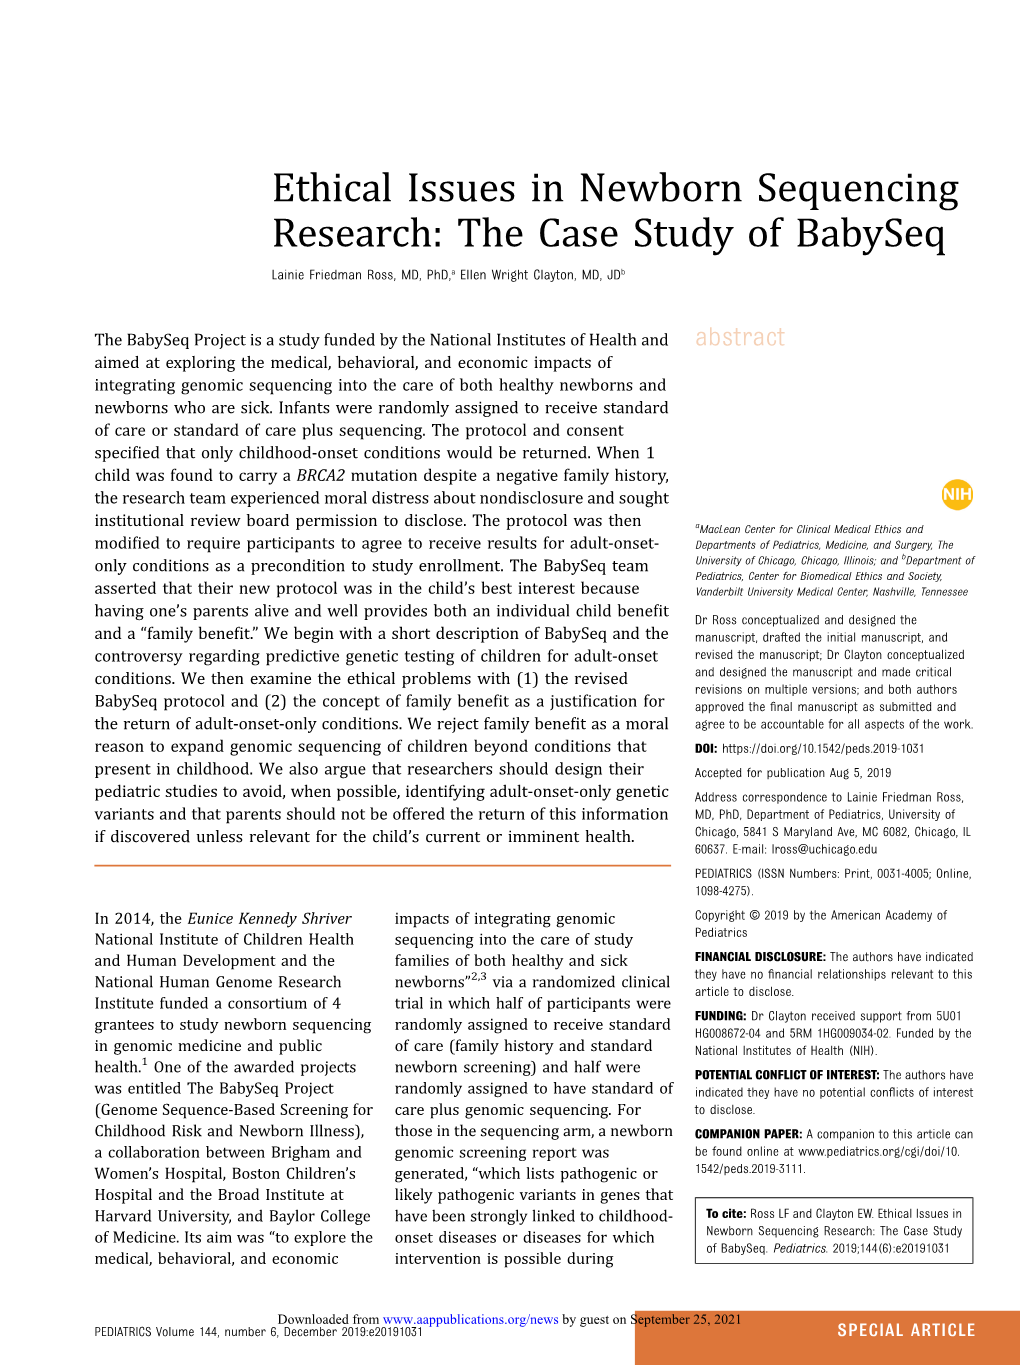 Ethical Issues in Newborn Sequencing Research: the Case Study of Babyseq Lainie Friedman Ross, MD, Phd,A Ellen Wright Clayton, MD, Jdb